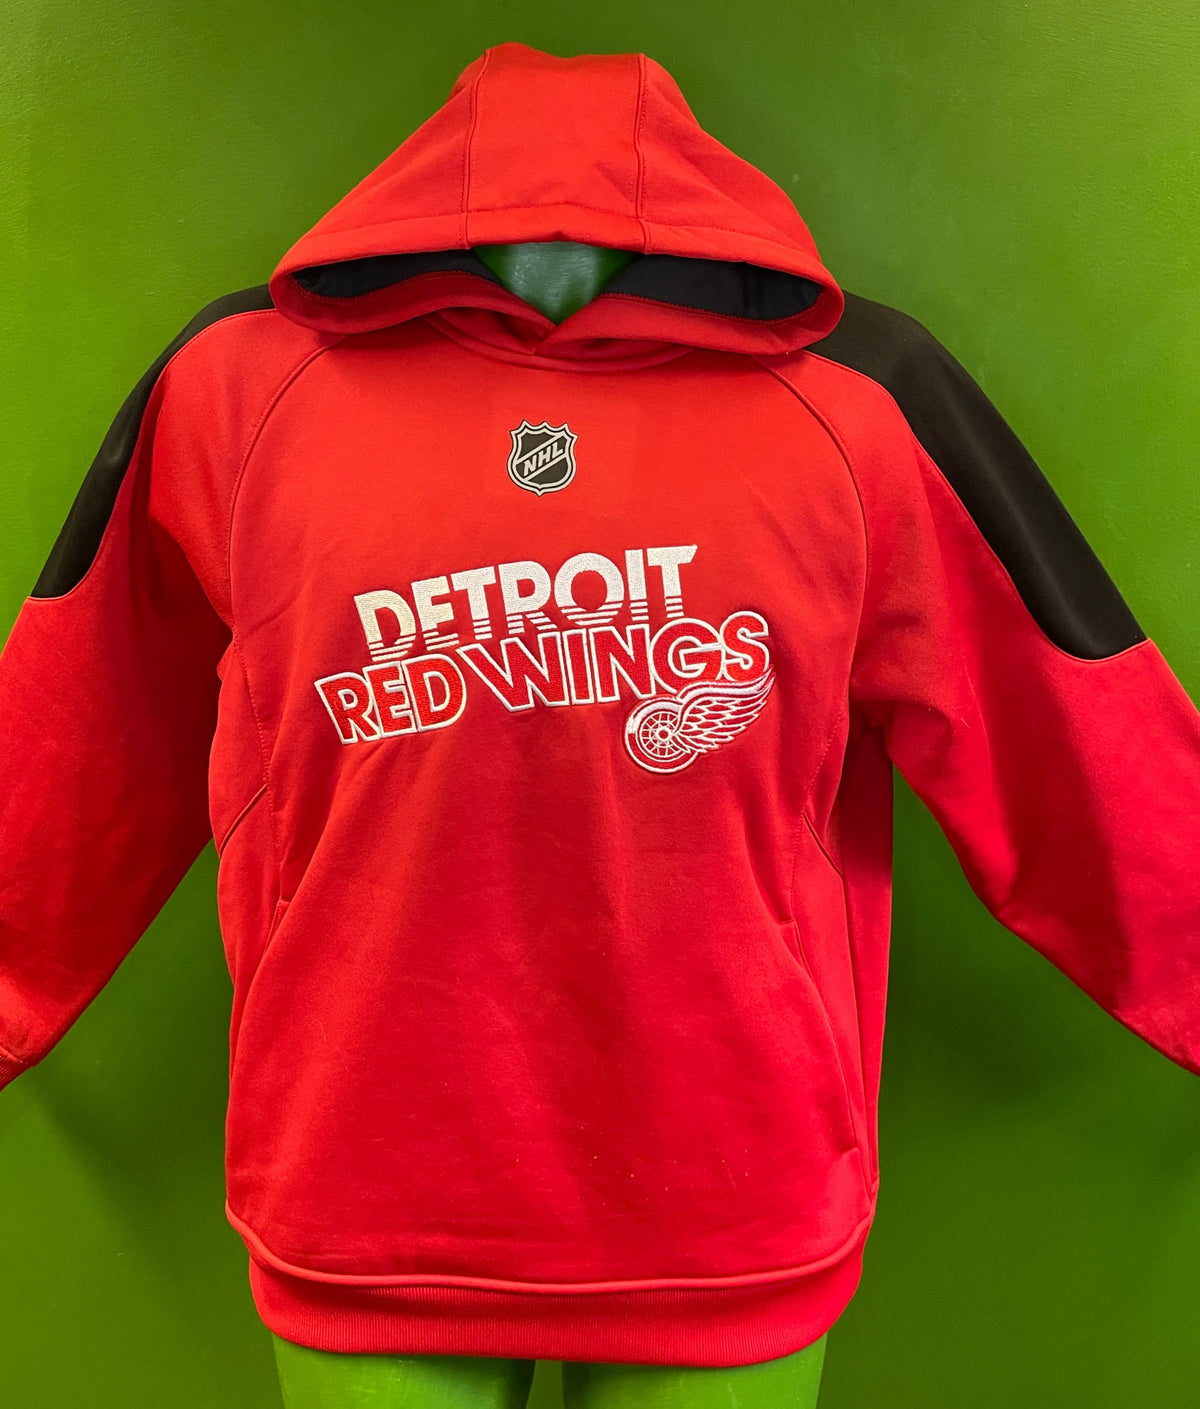 NHL Detroit Red Wings Stitched Pullover Hoodie Youth Large 14-16